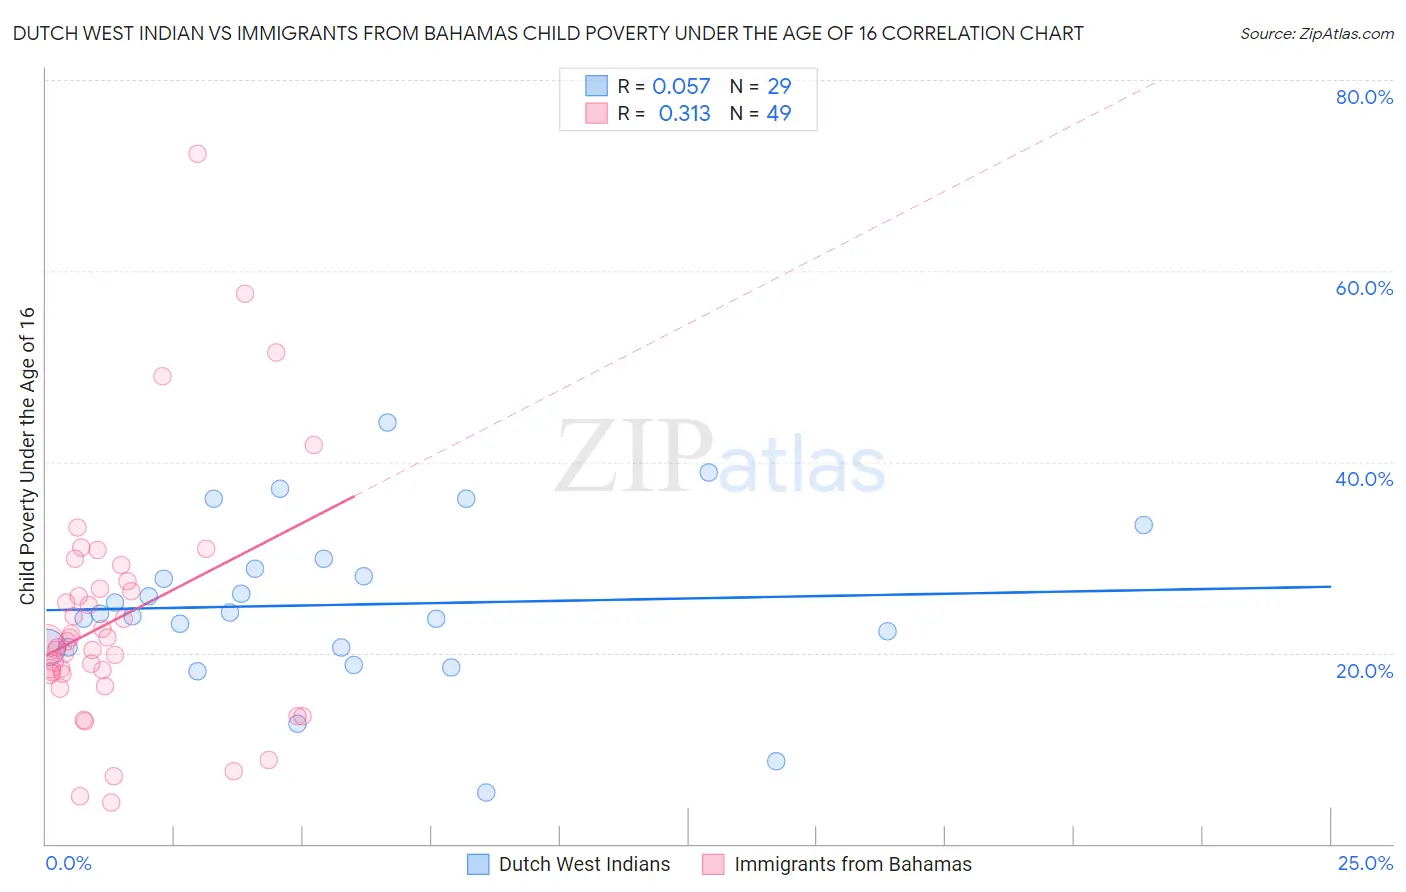 Dutch West Indian vs Immigrants from Bahamas Child Poverty Under the Age of 16